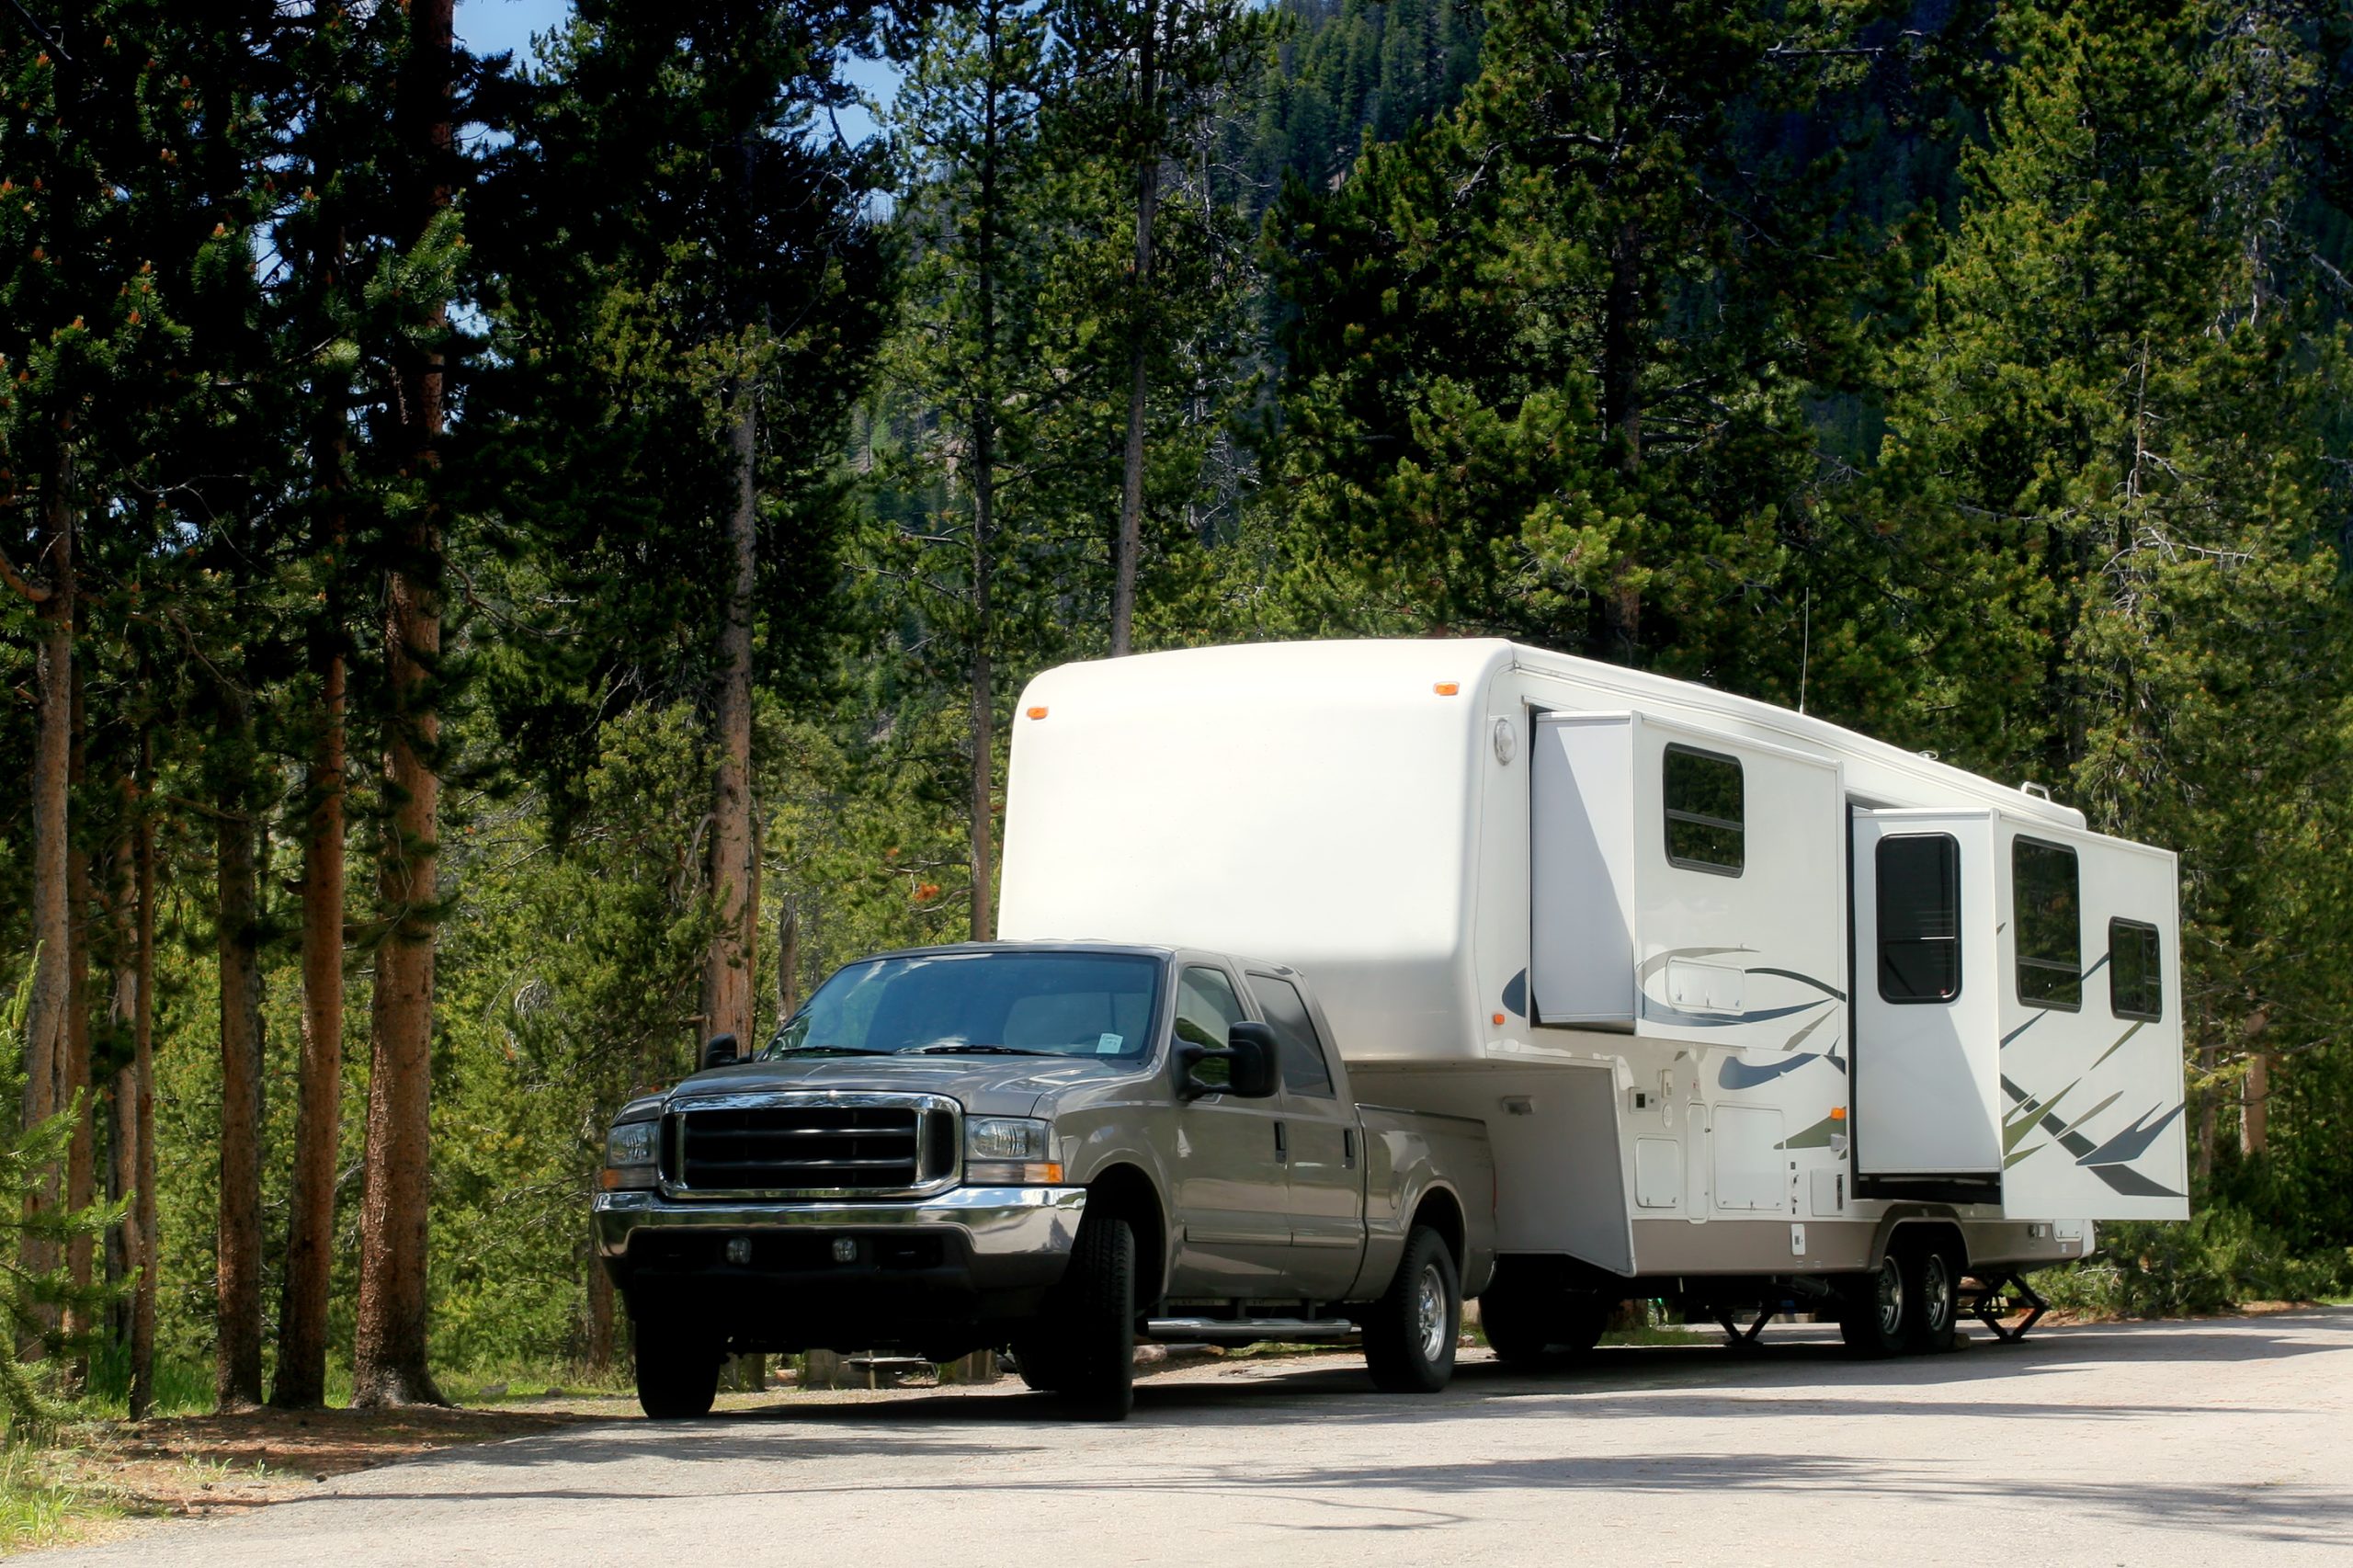 A grey pickup truck pulling a fifth-wheel motorhome is parked at the side of a road lined with pine trees.